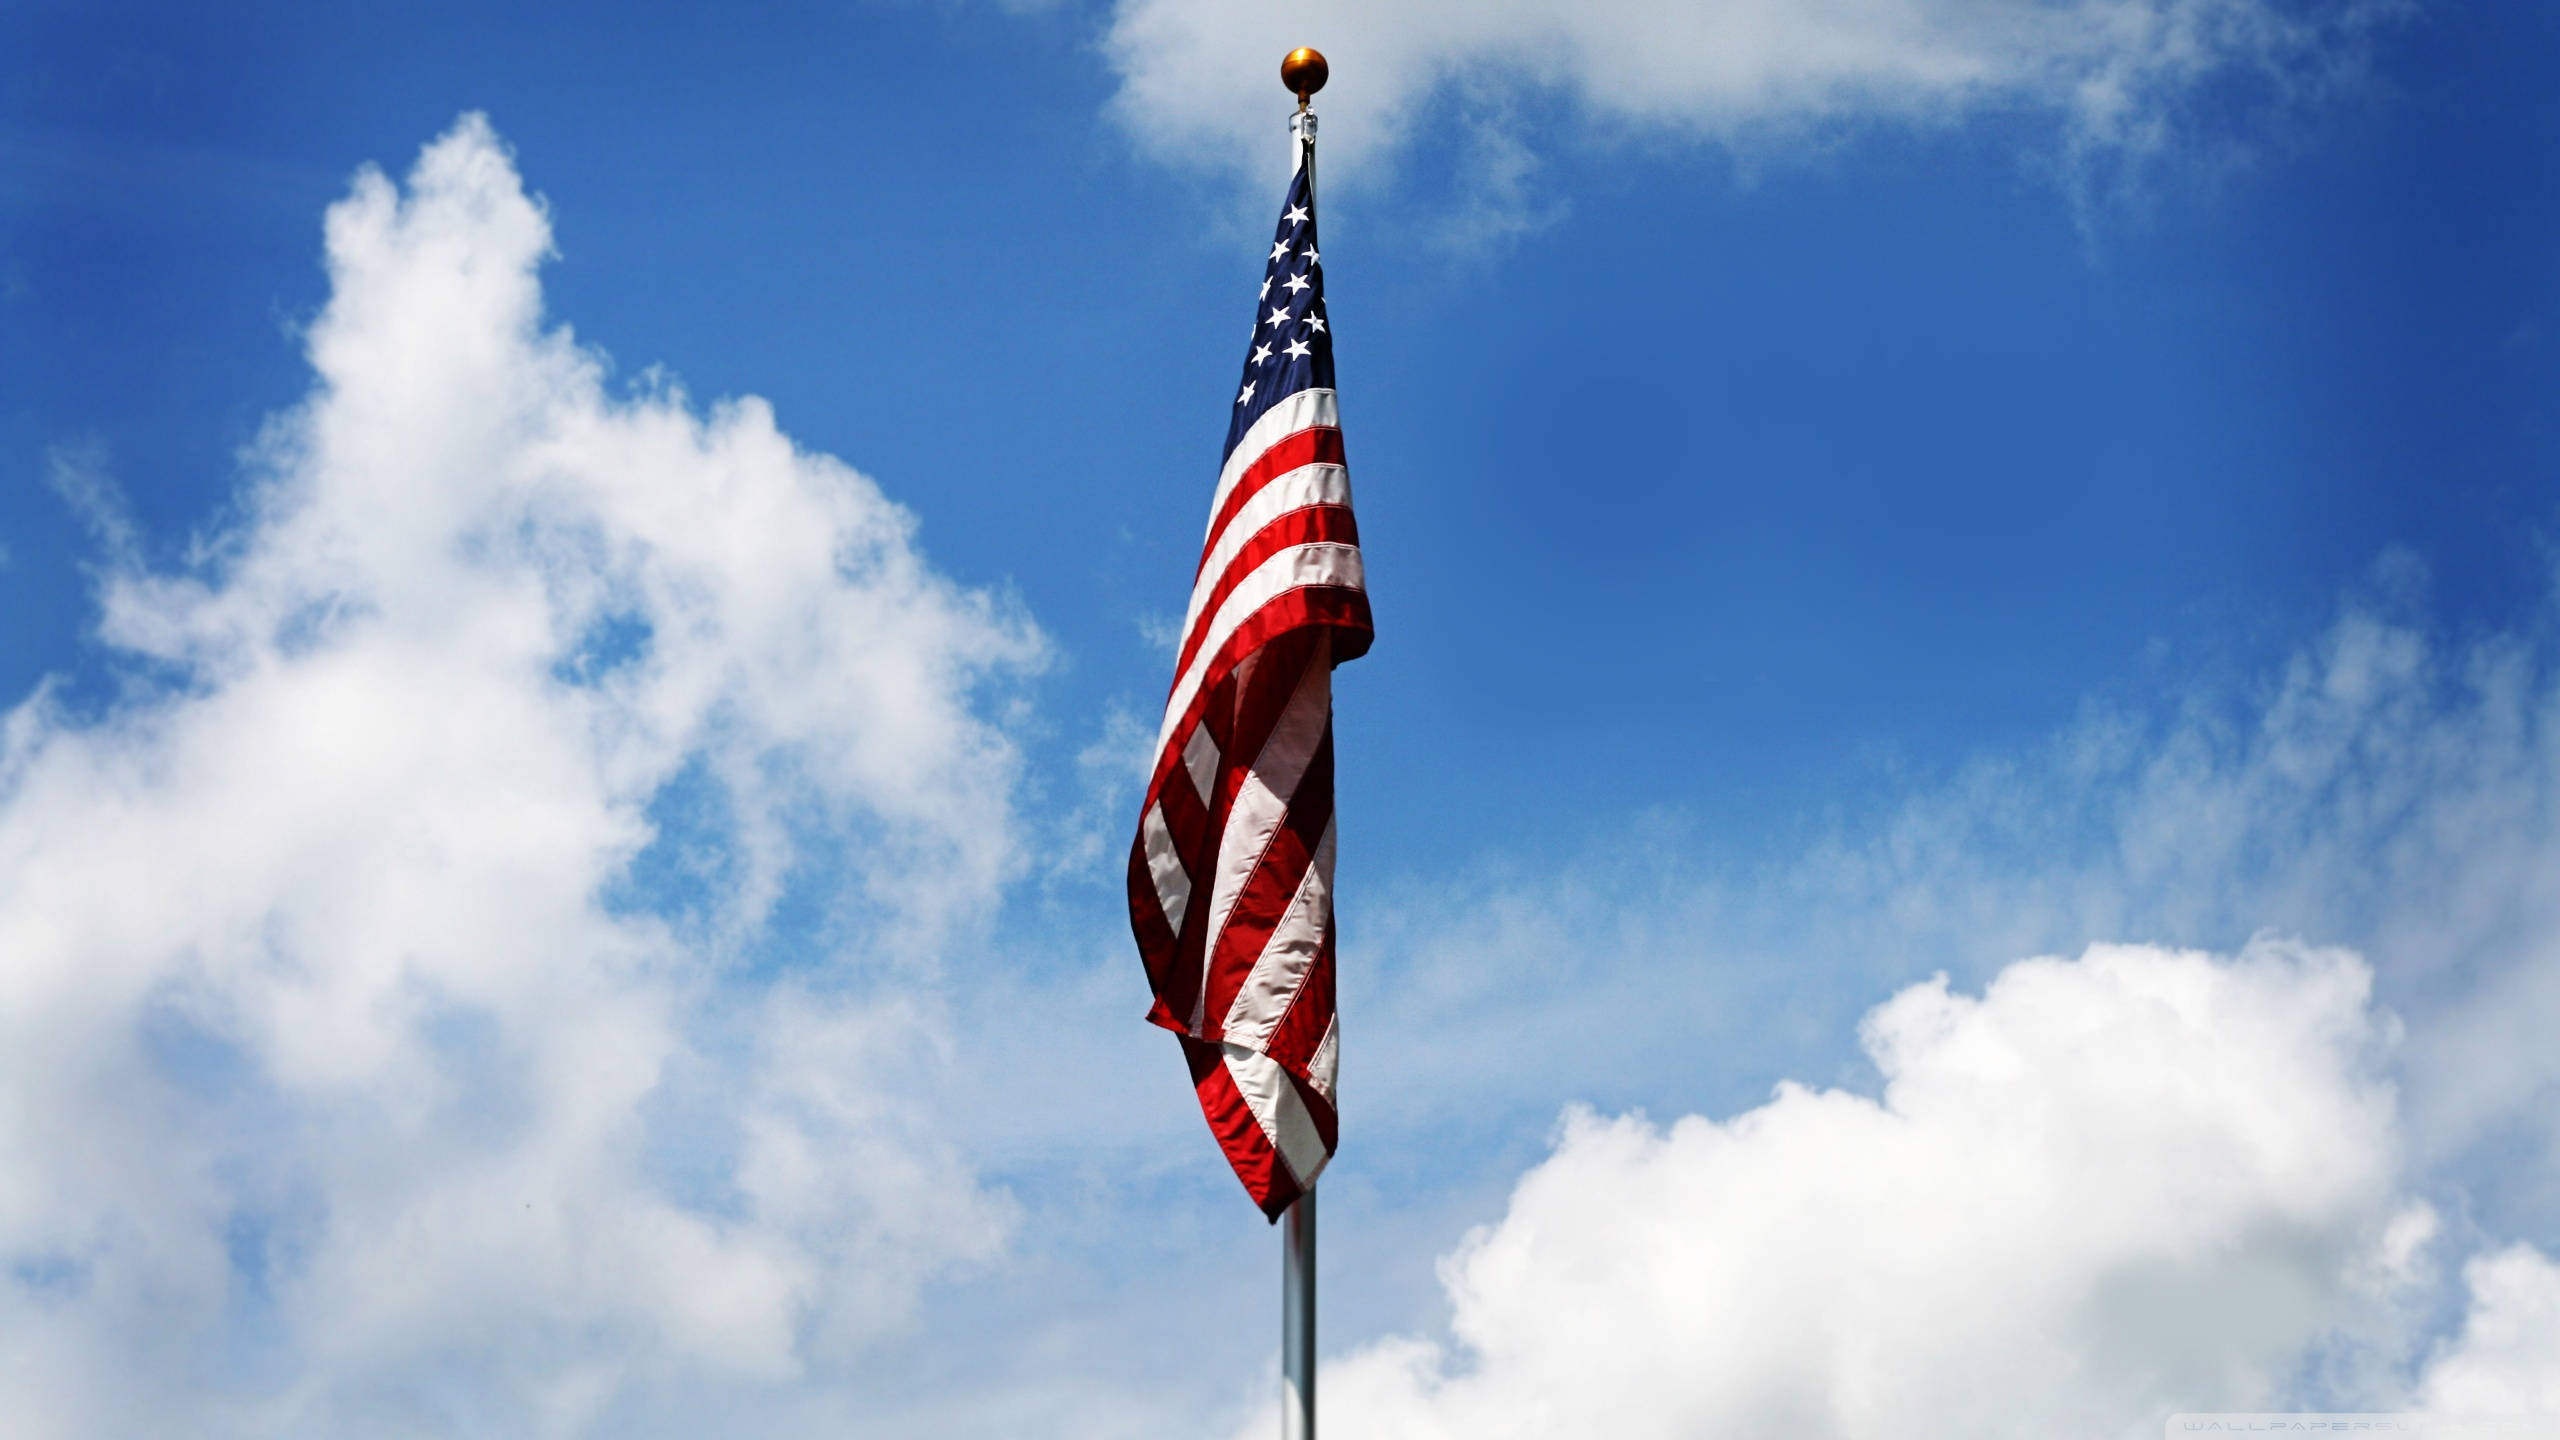 American Flag Hd On Clear Day Picture